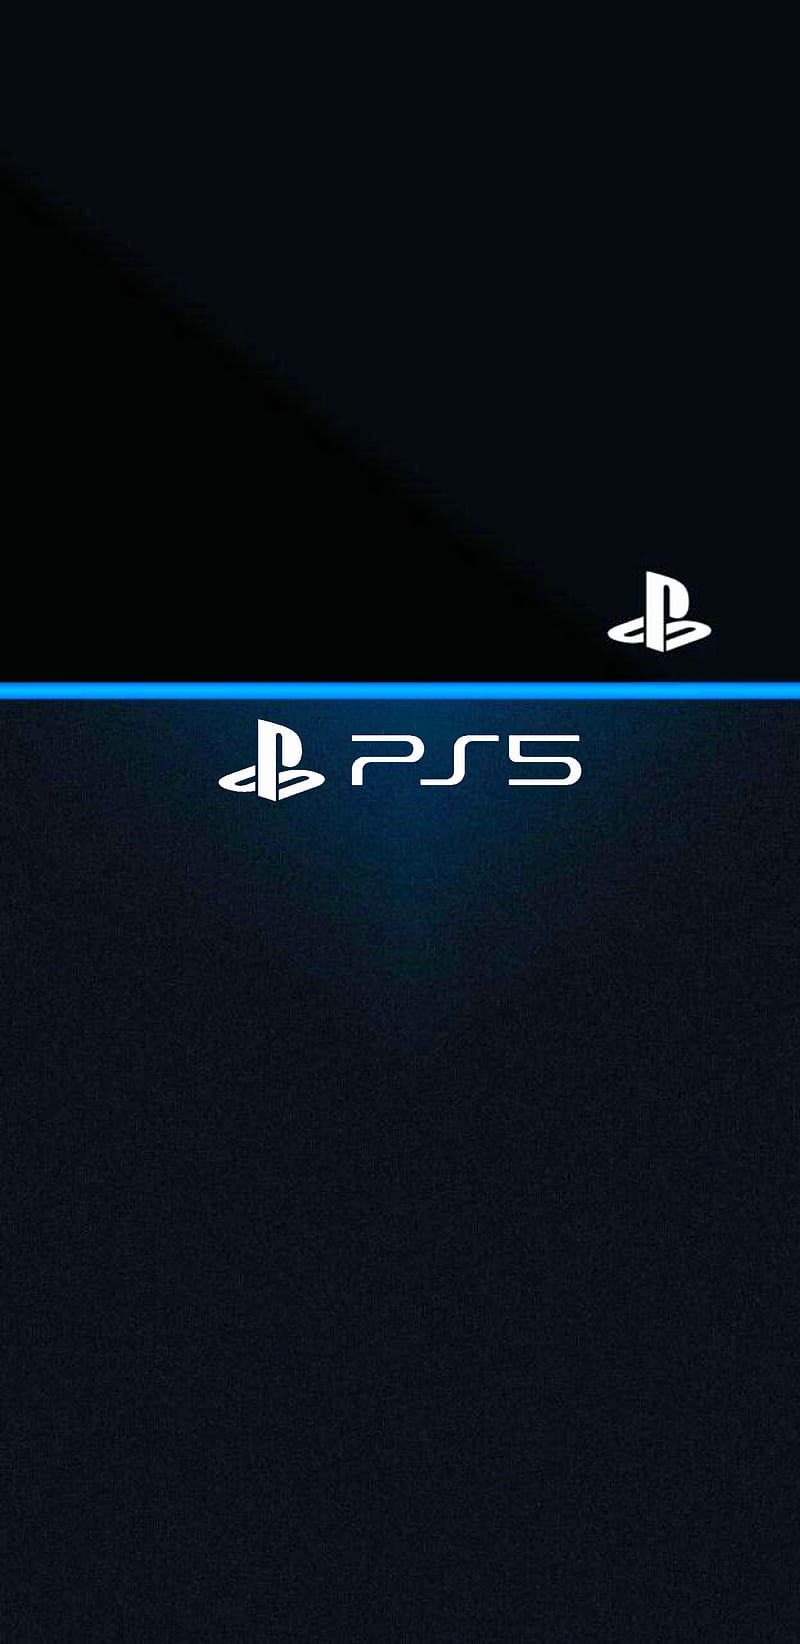 Ps5 Black Gold Iphone Phone Playstation Ps4 Sony Xbox Hd Mobile Wallpaper Peakpx